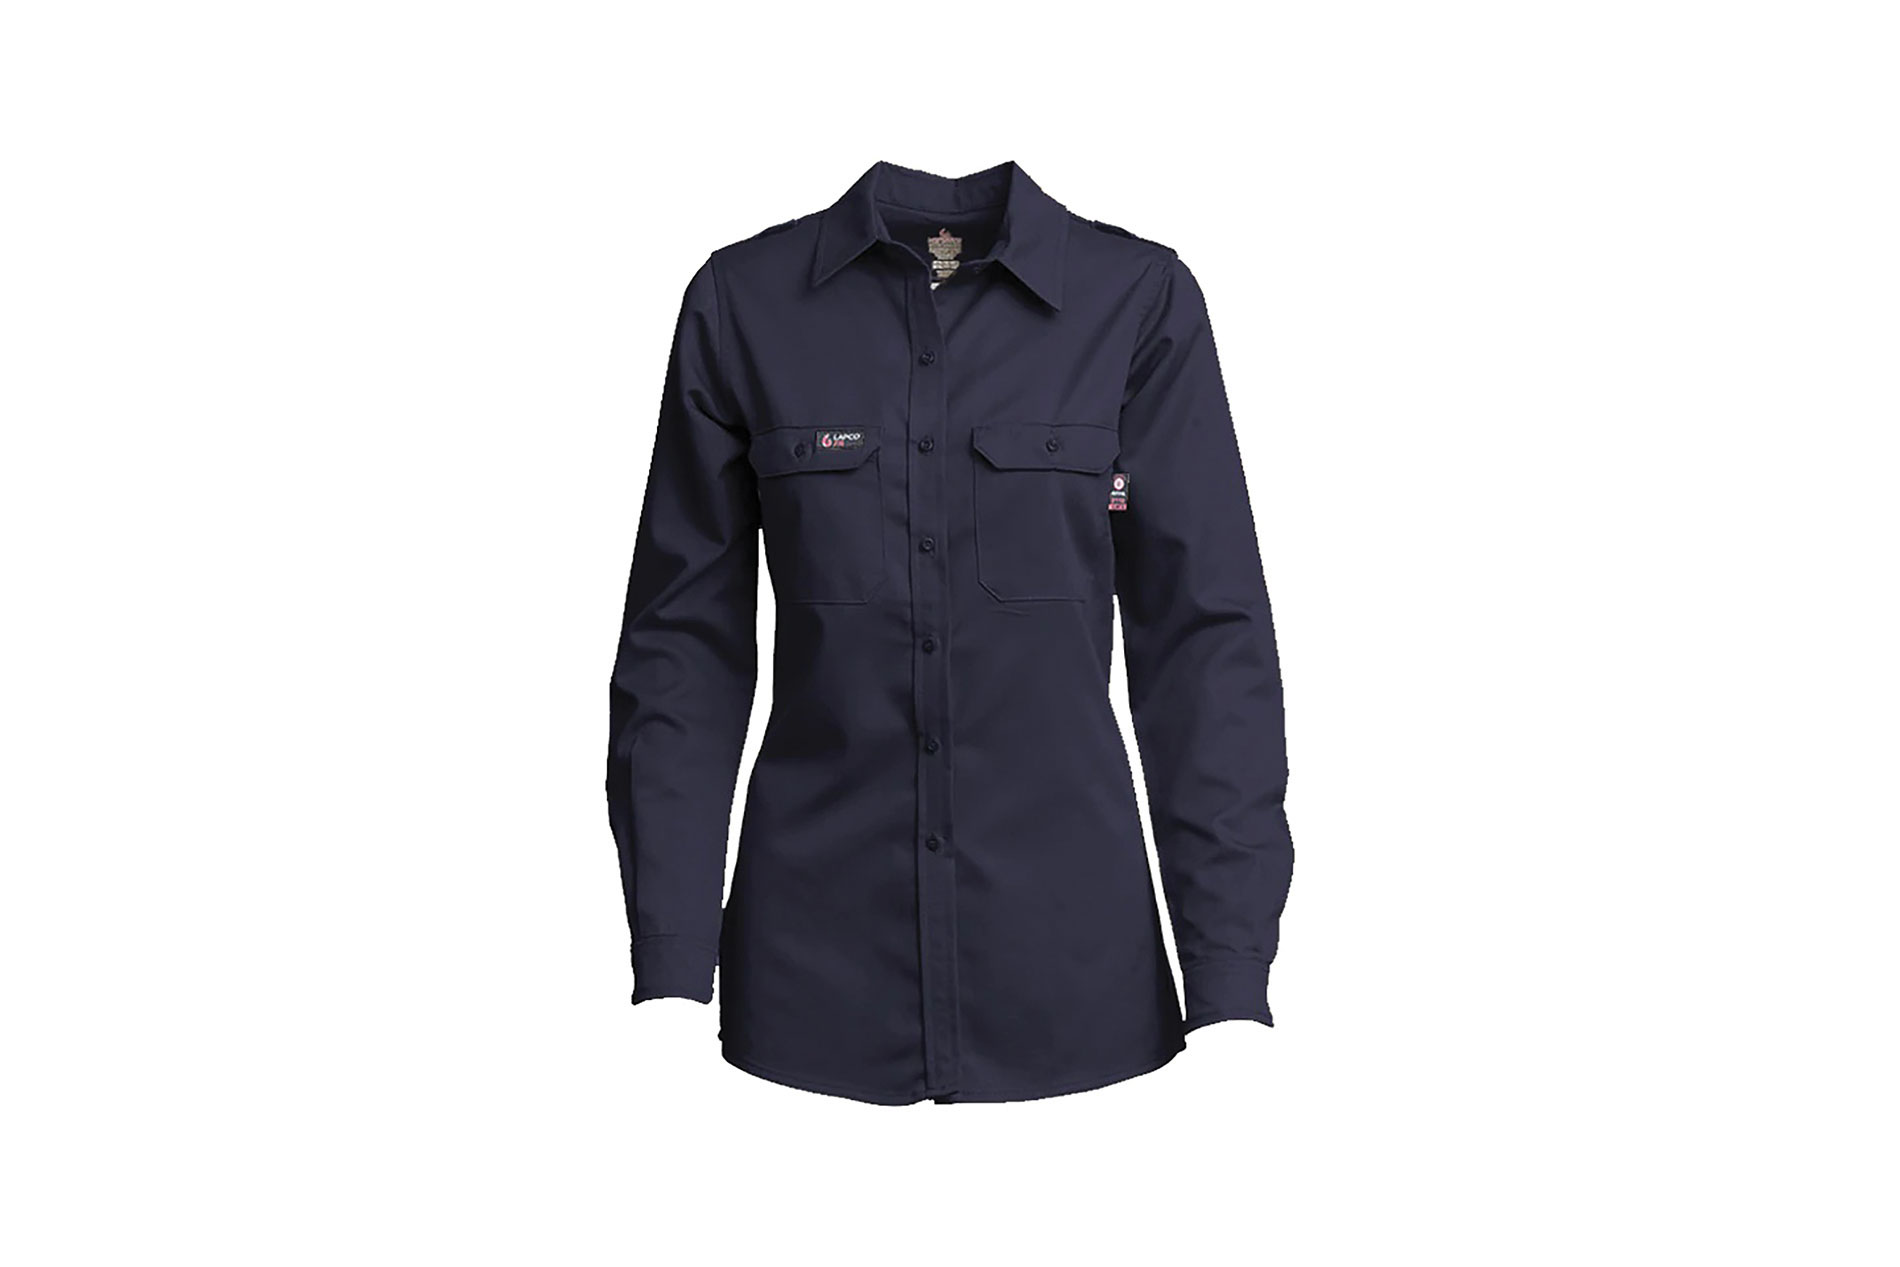 Navy blue work shirt. Image by LAPCO Manufacturing Inc.